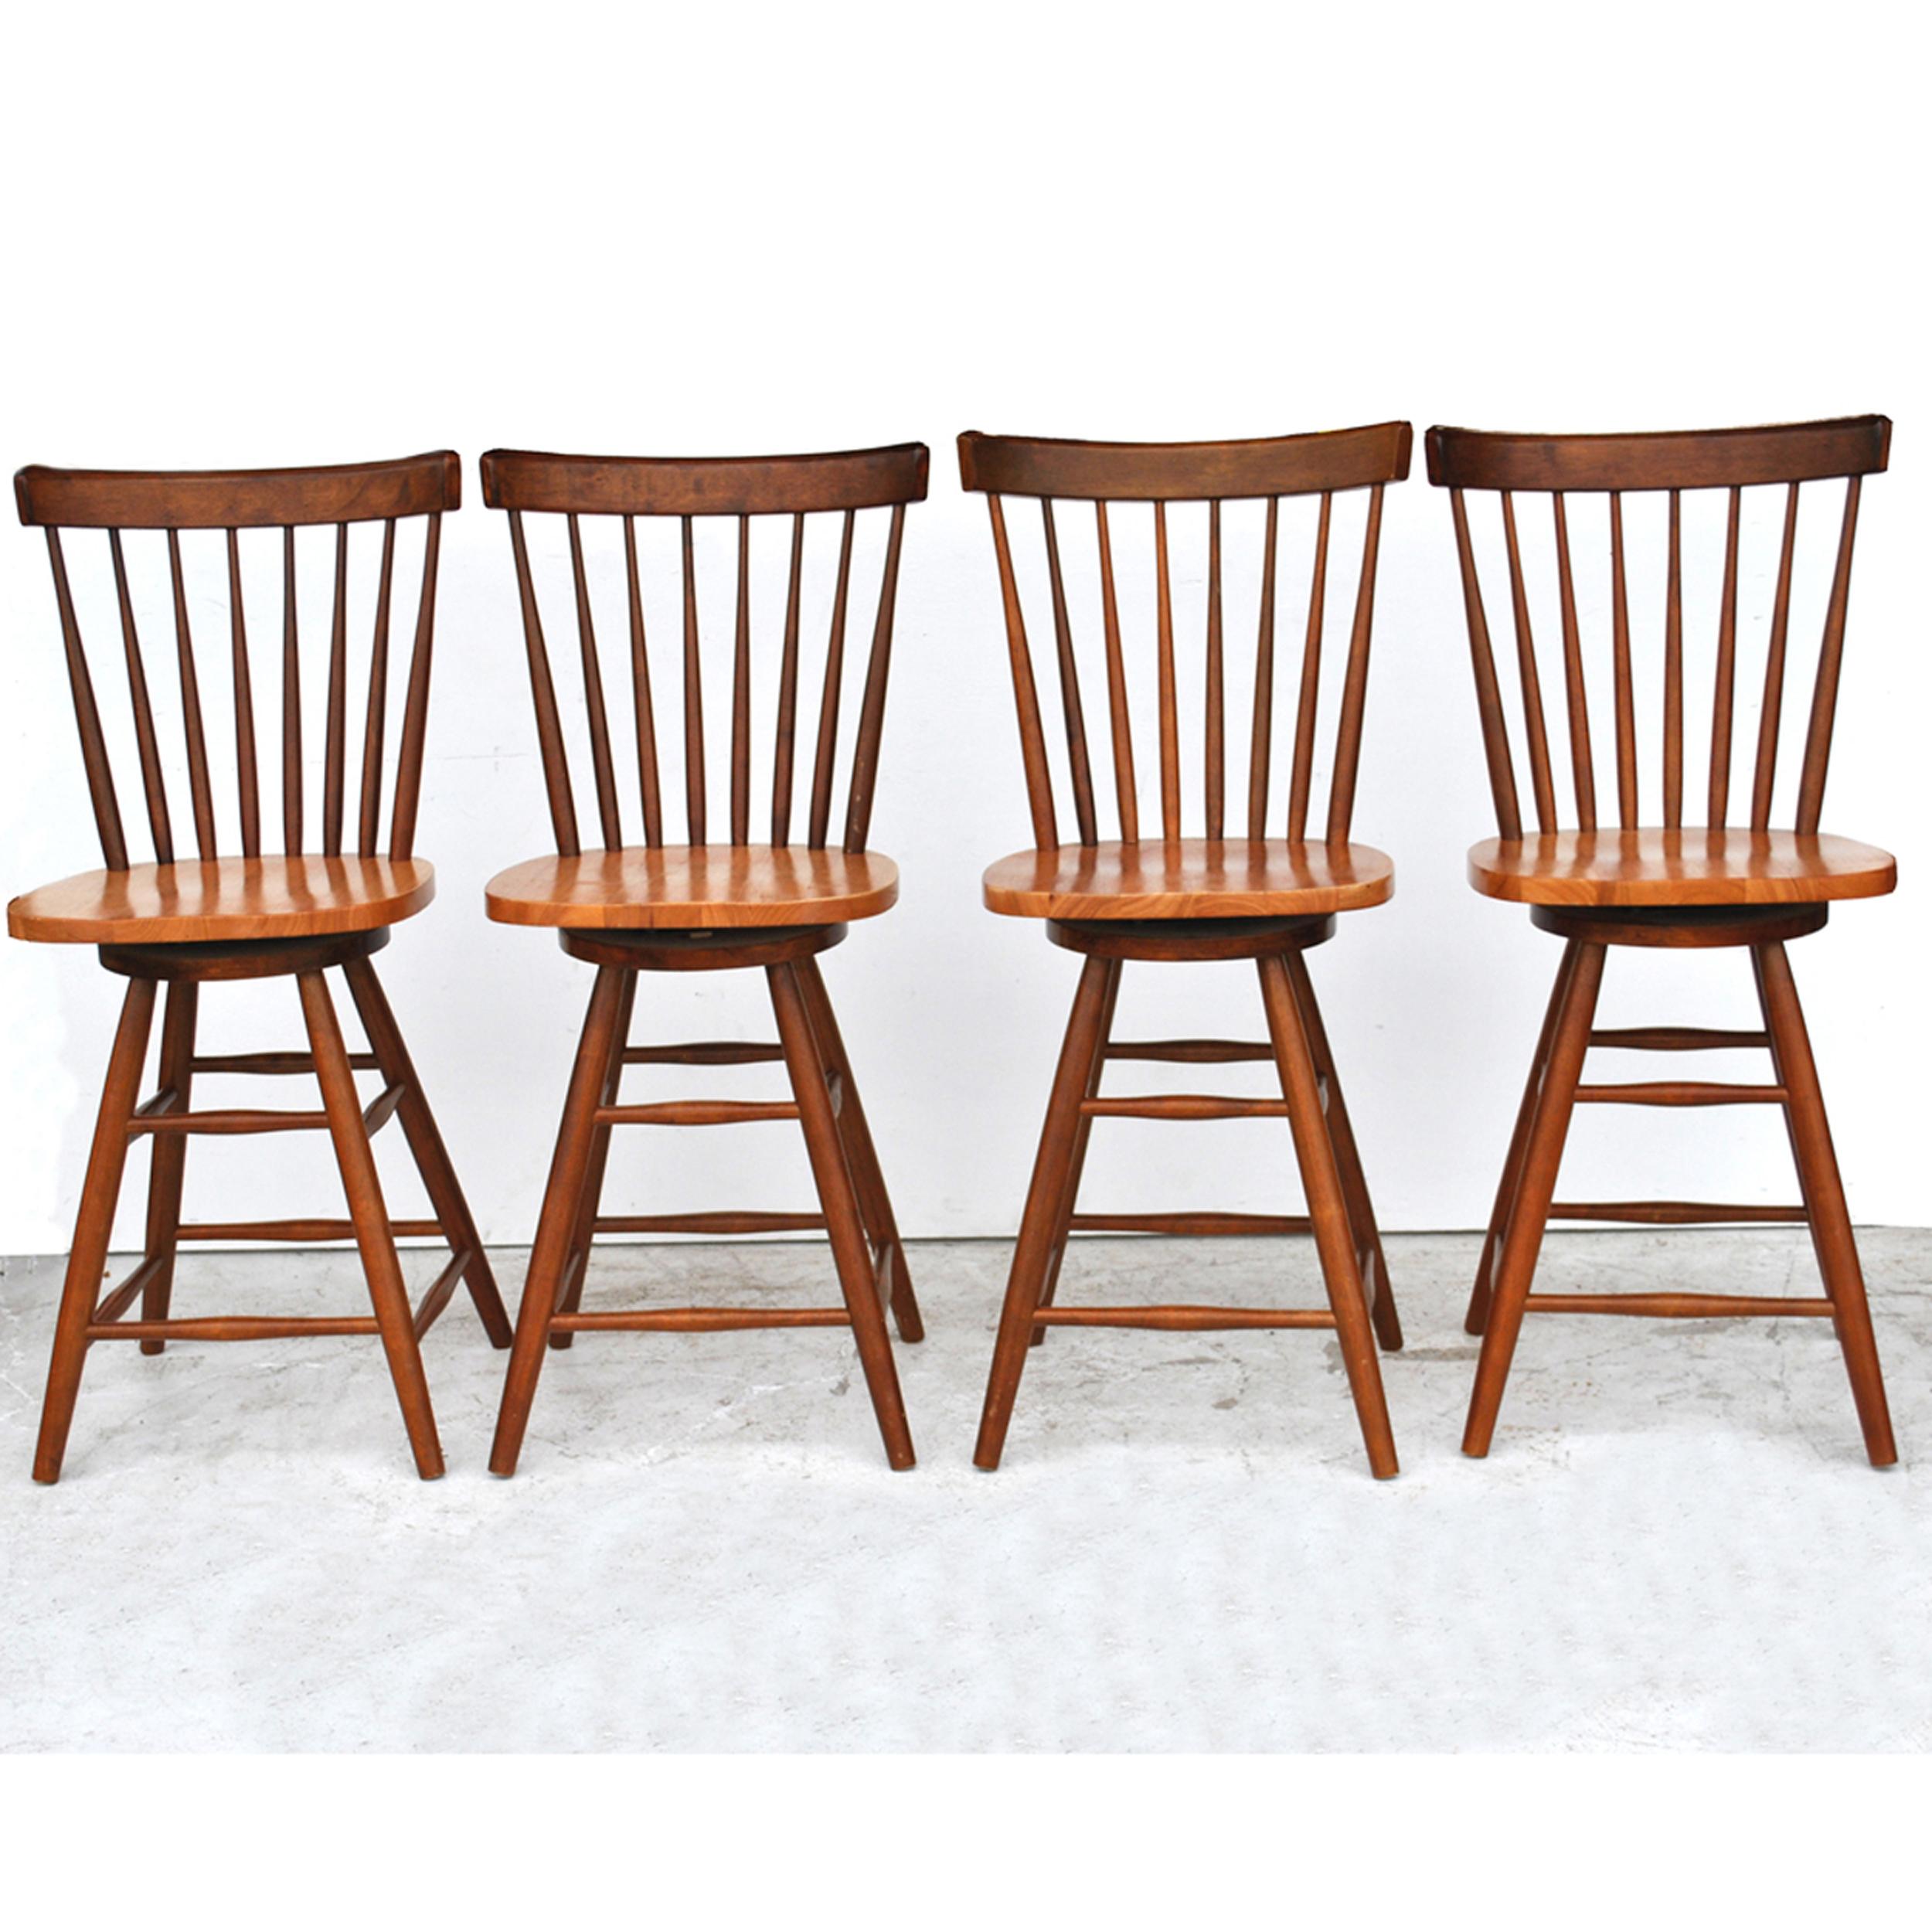 Thomasville Furniture is 

Set of four 42' Thomasville teak counter height stools
A clean, modern version of a traditional stool.
Rich teak with spindle backs. Swivel mechanism.
24.5